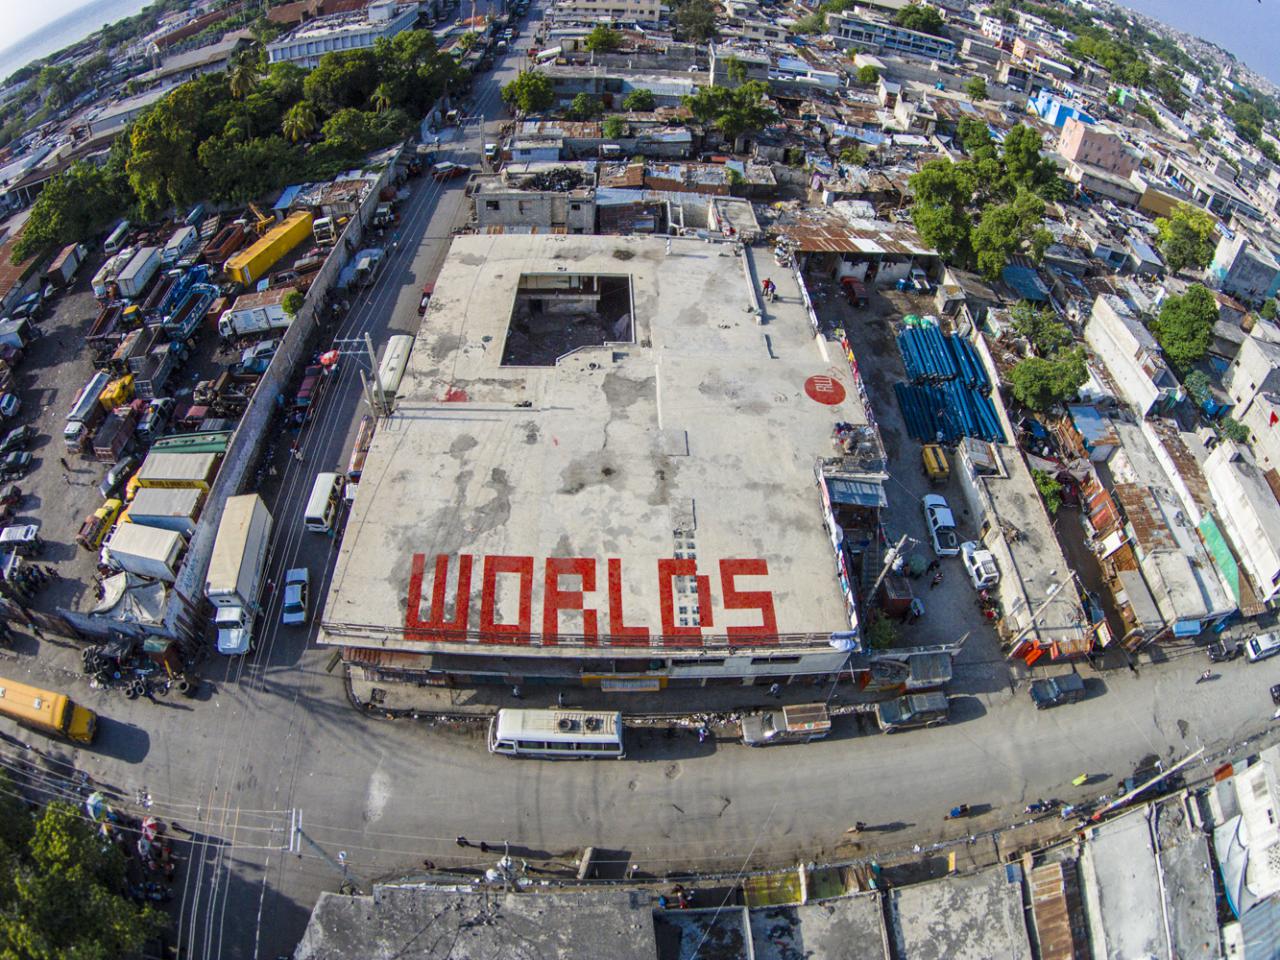 The word "worlds" written in big red letters on a roof top in haiti, view from above